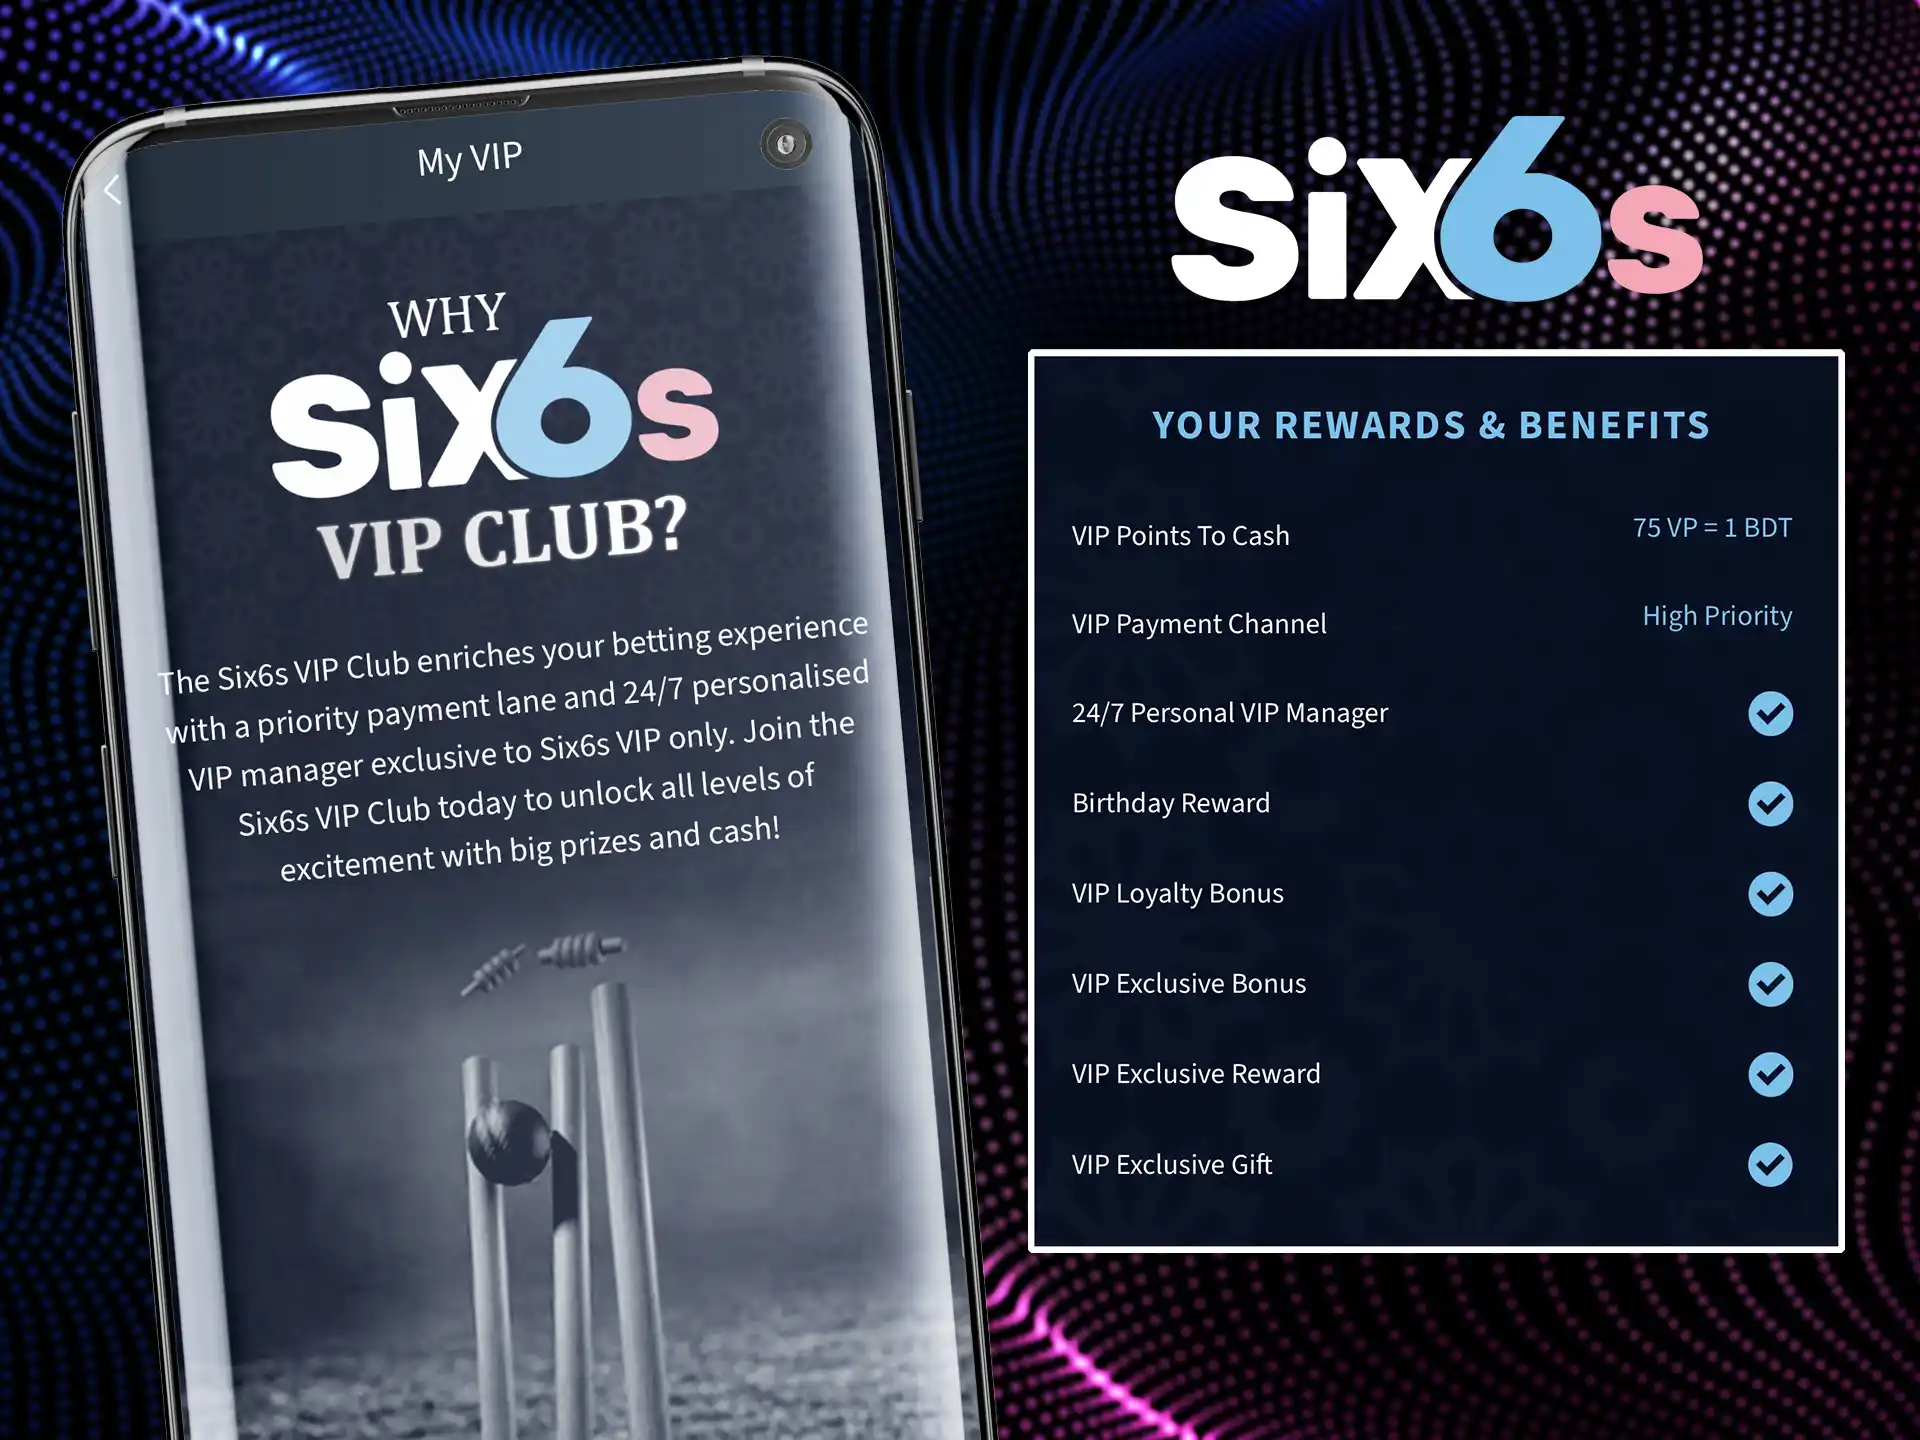 Join the VIP Club and receive exclusive offers.